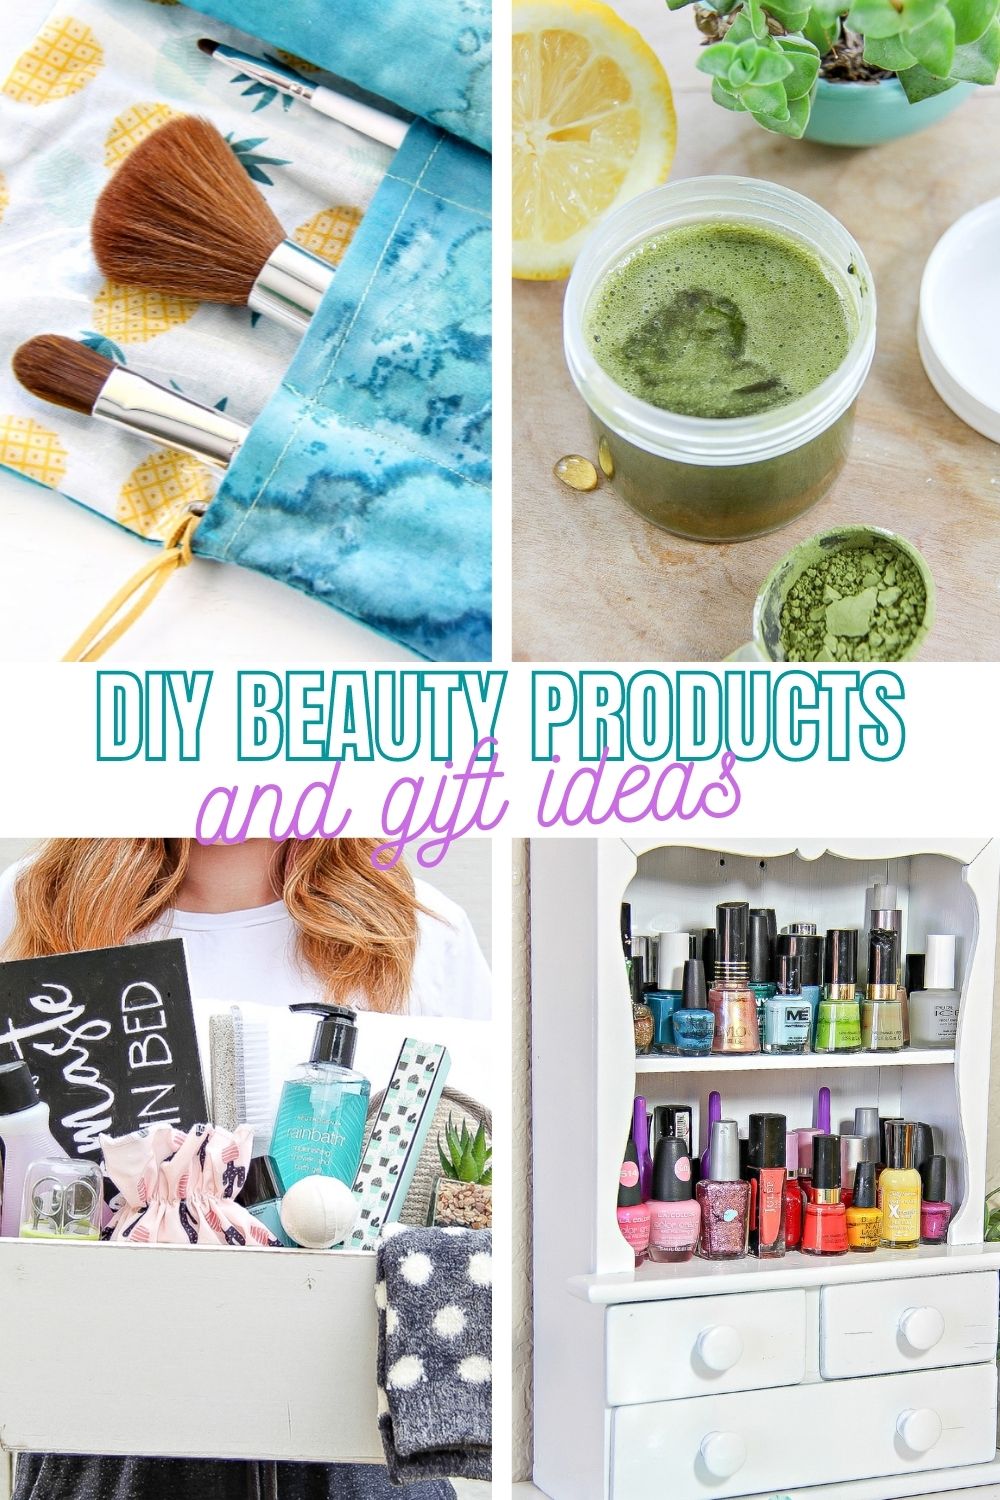 DIY beauty products Pinterest image